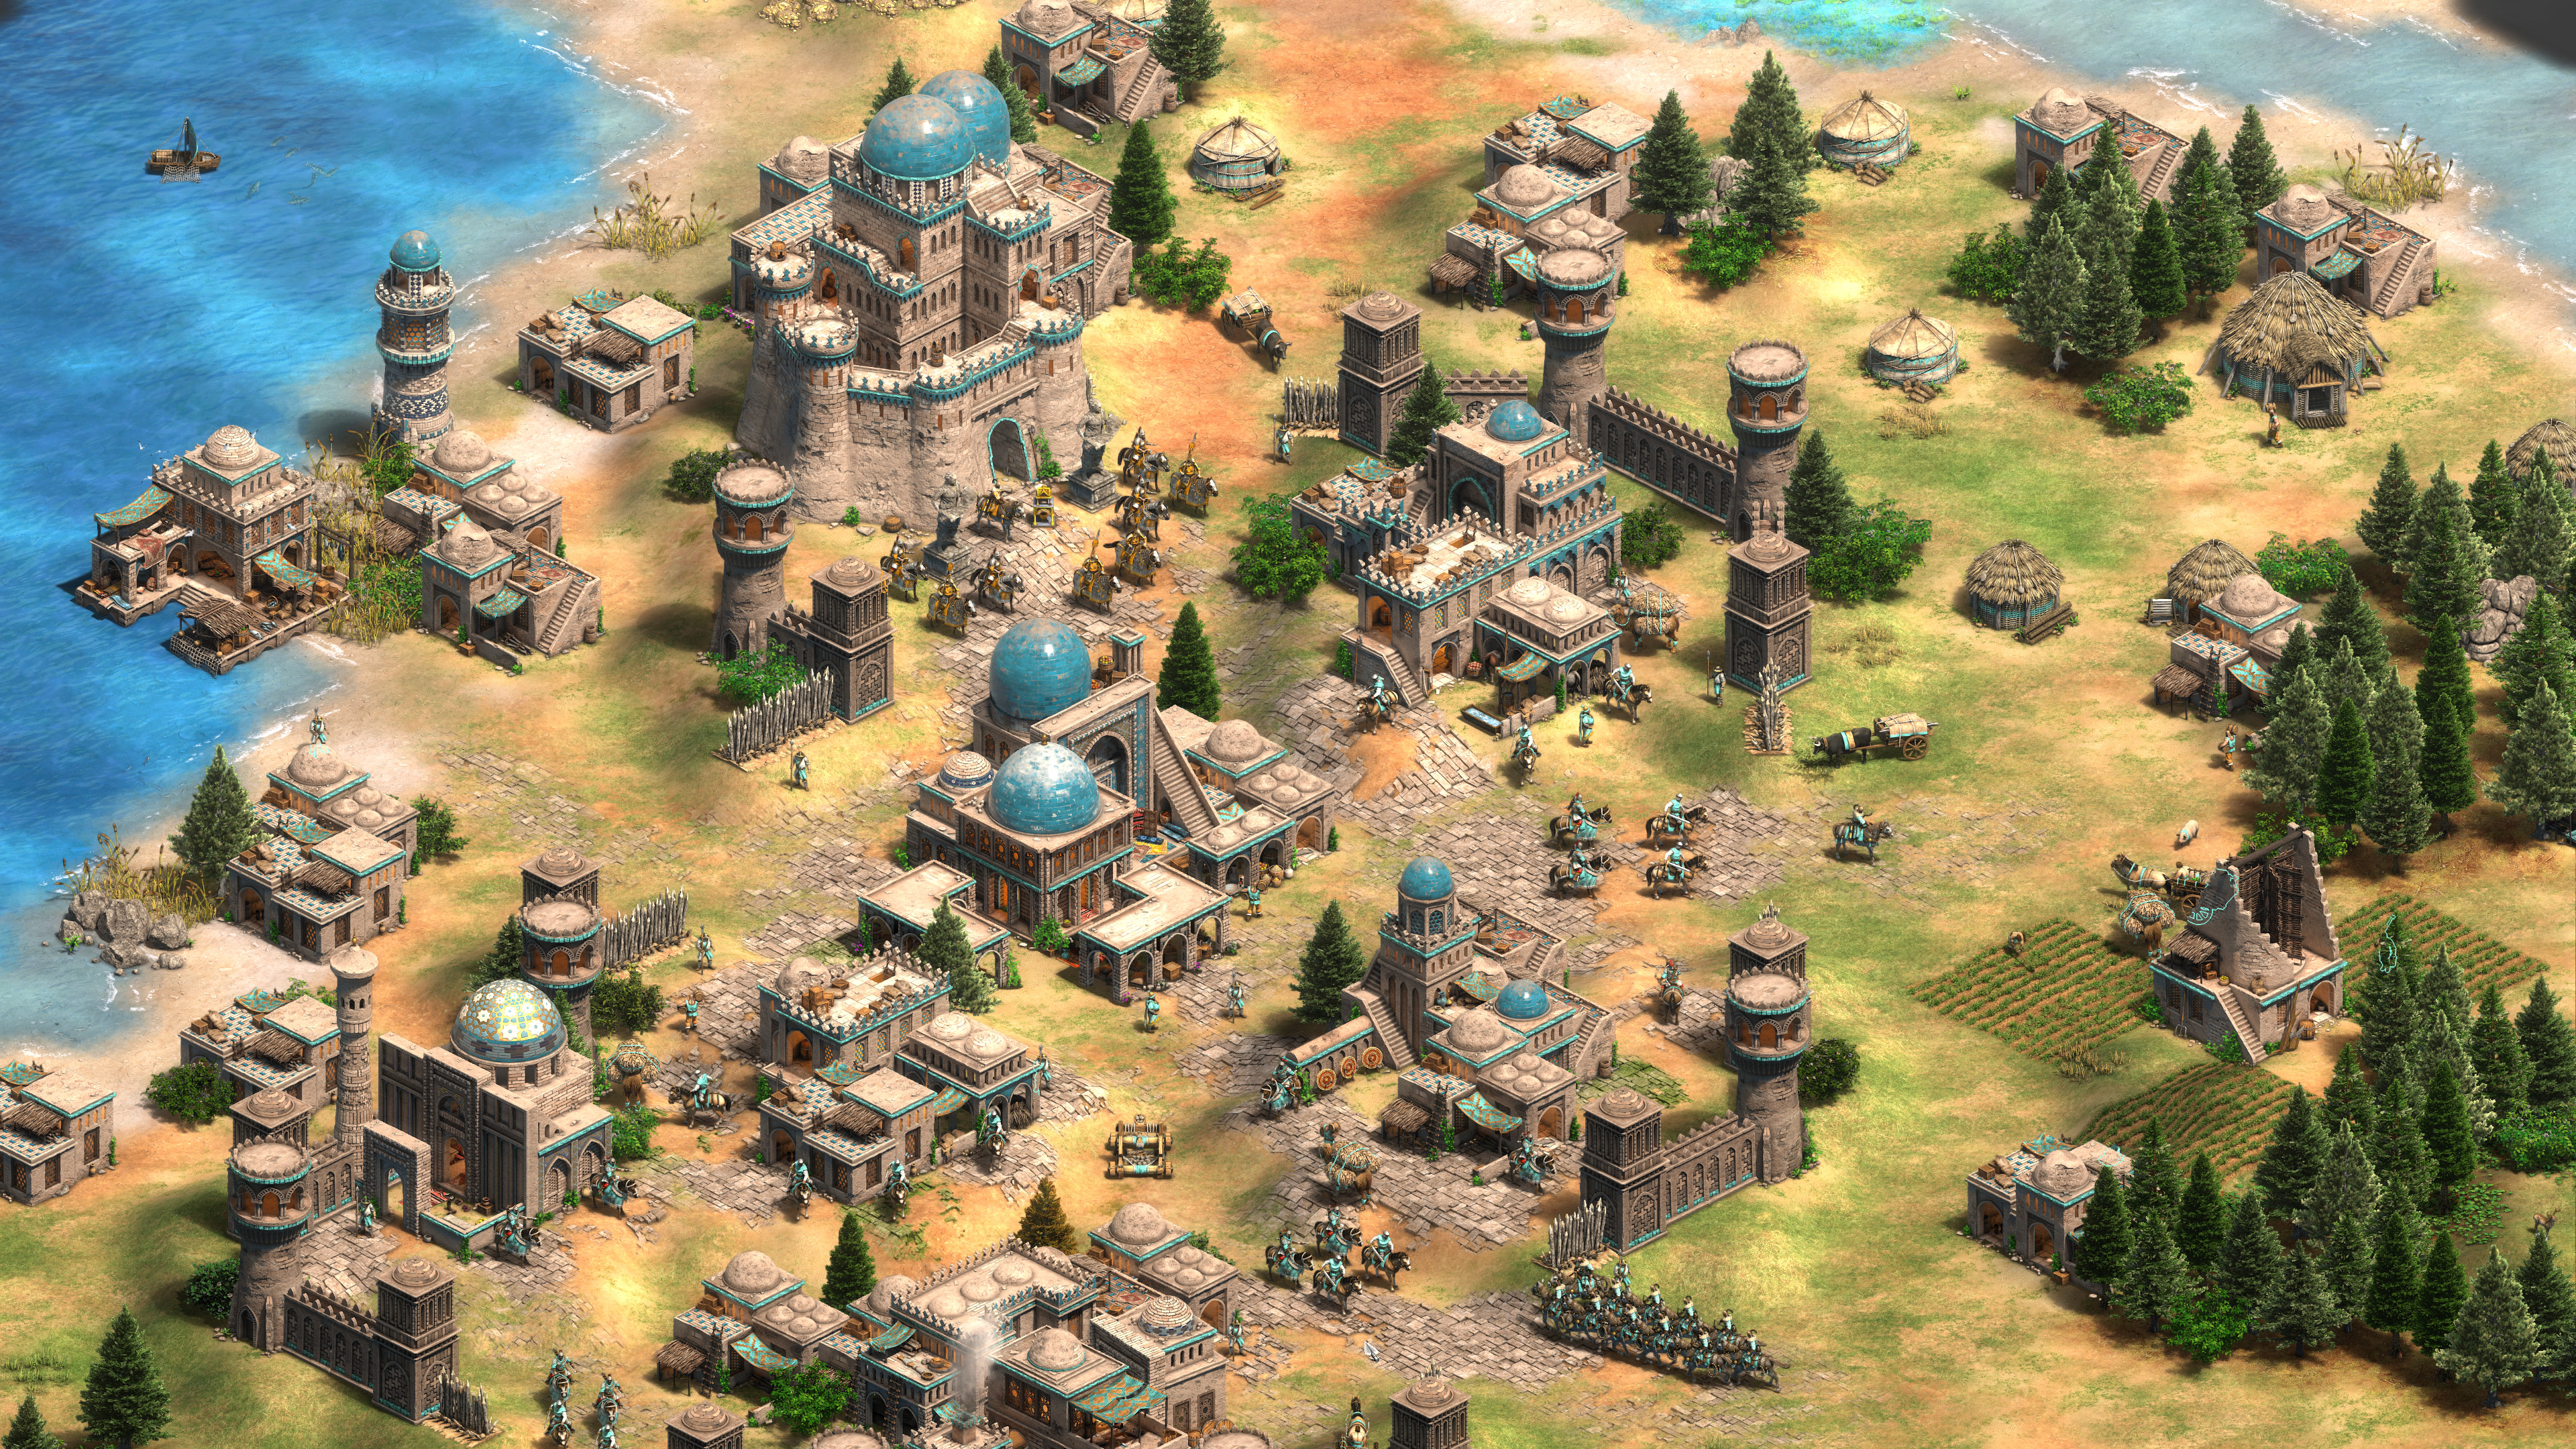 Age Of Empires 2 Full High Compress